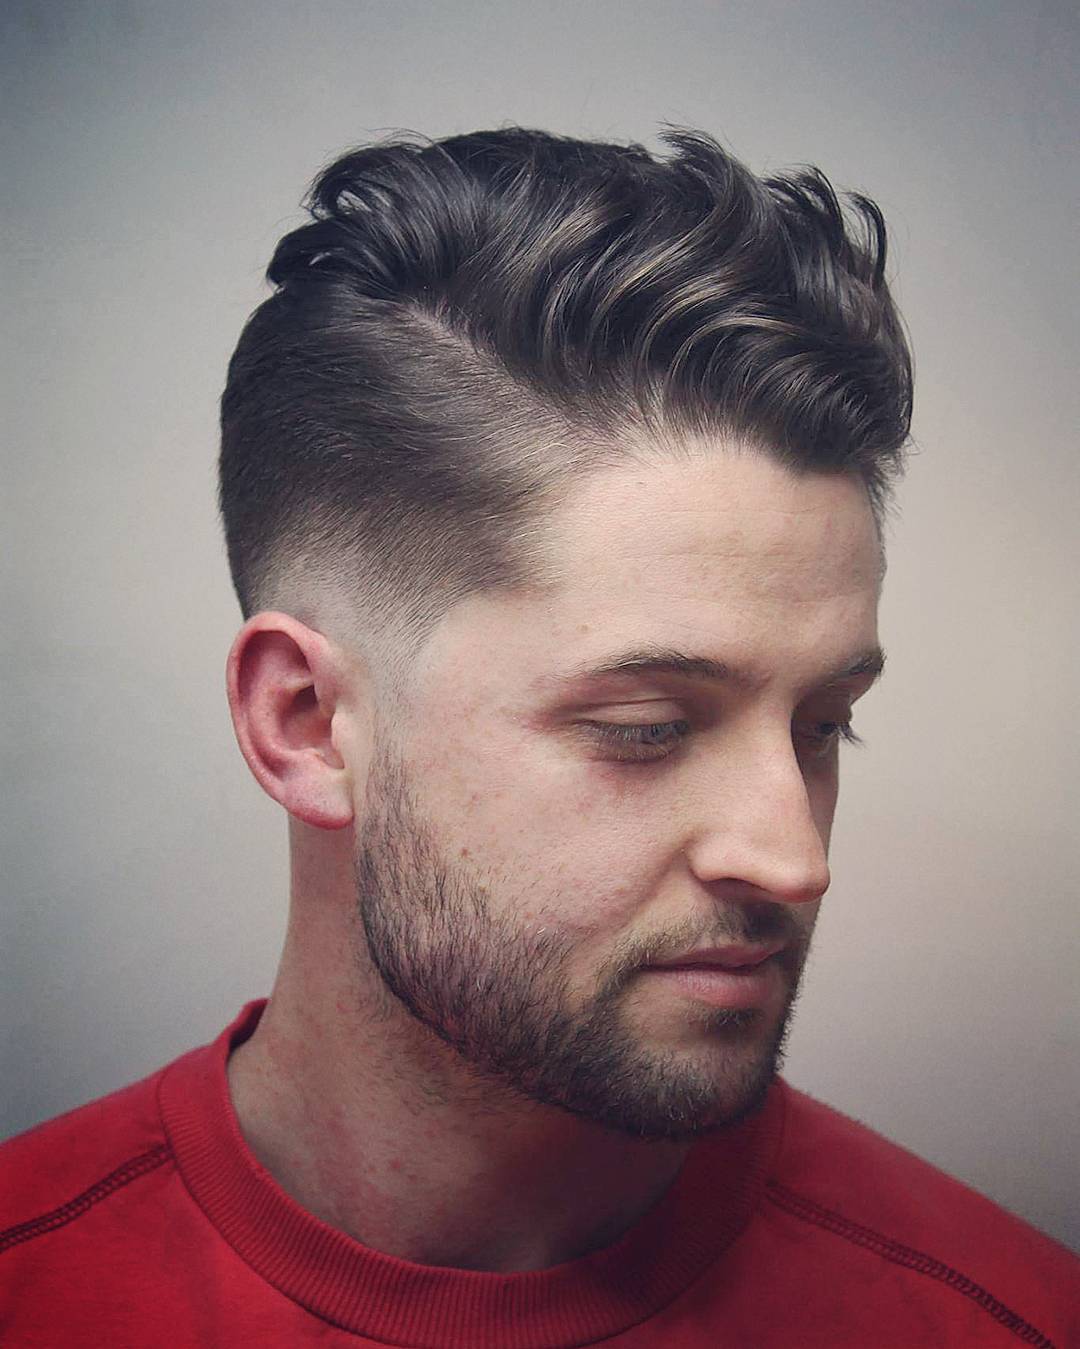 Trending Men's Hairstyle: The Low Fade Haircut